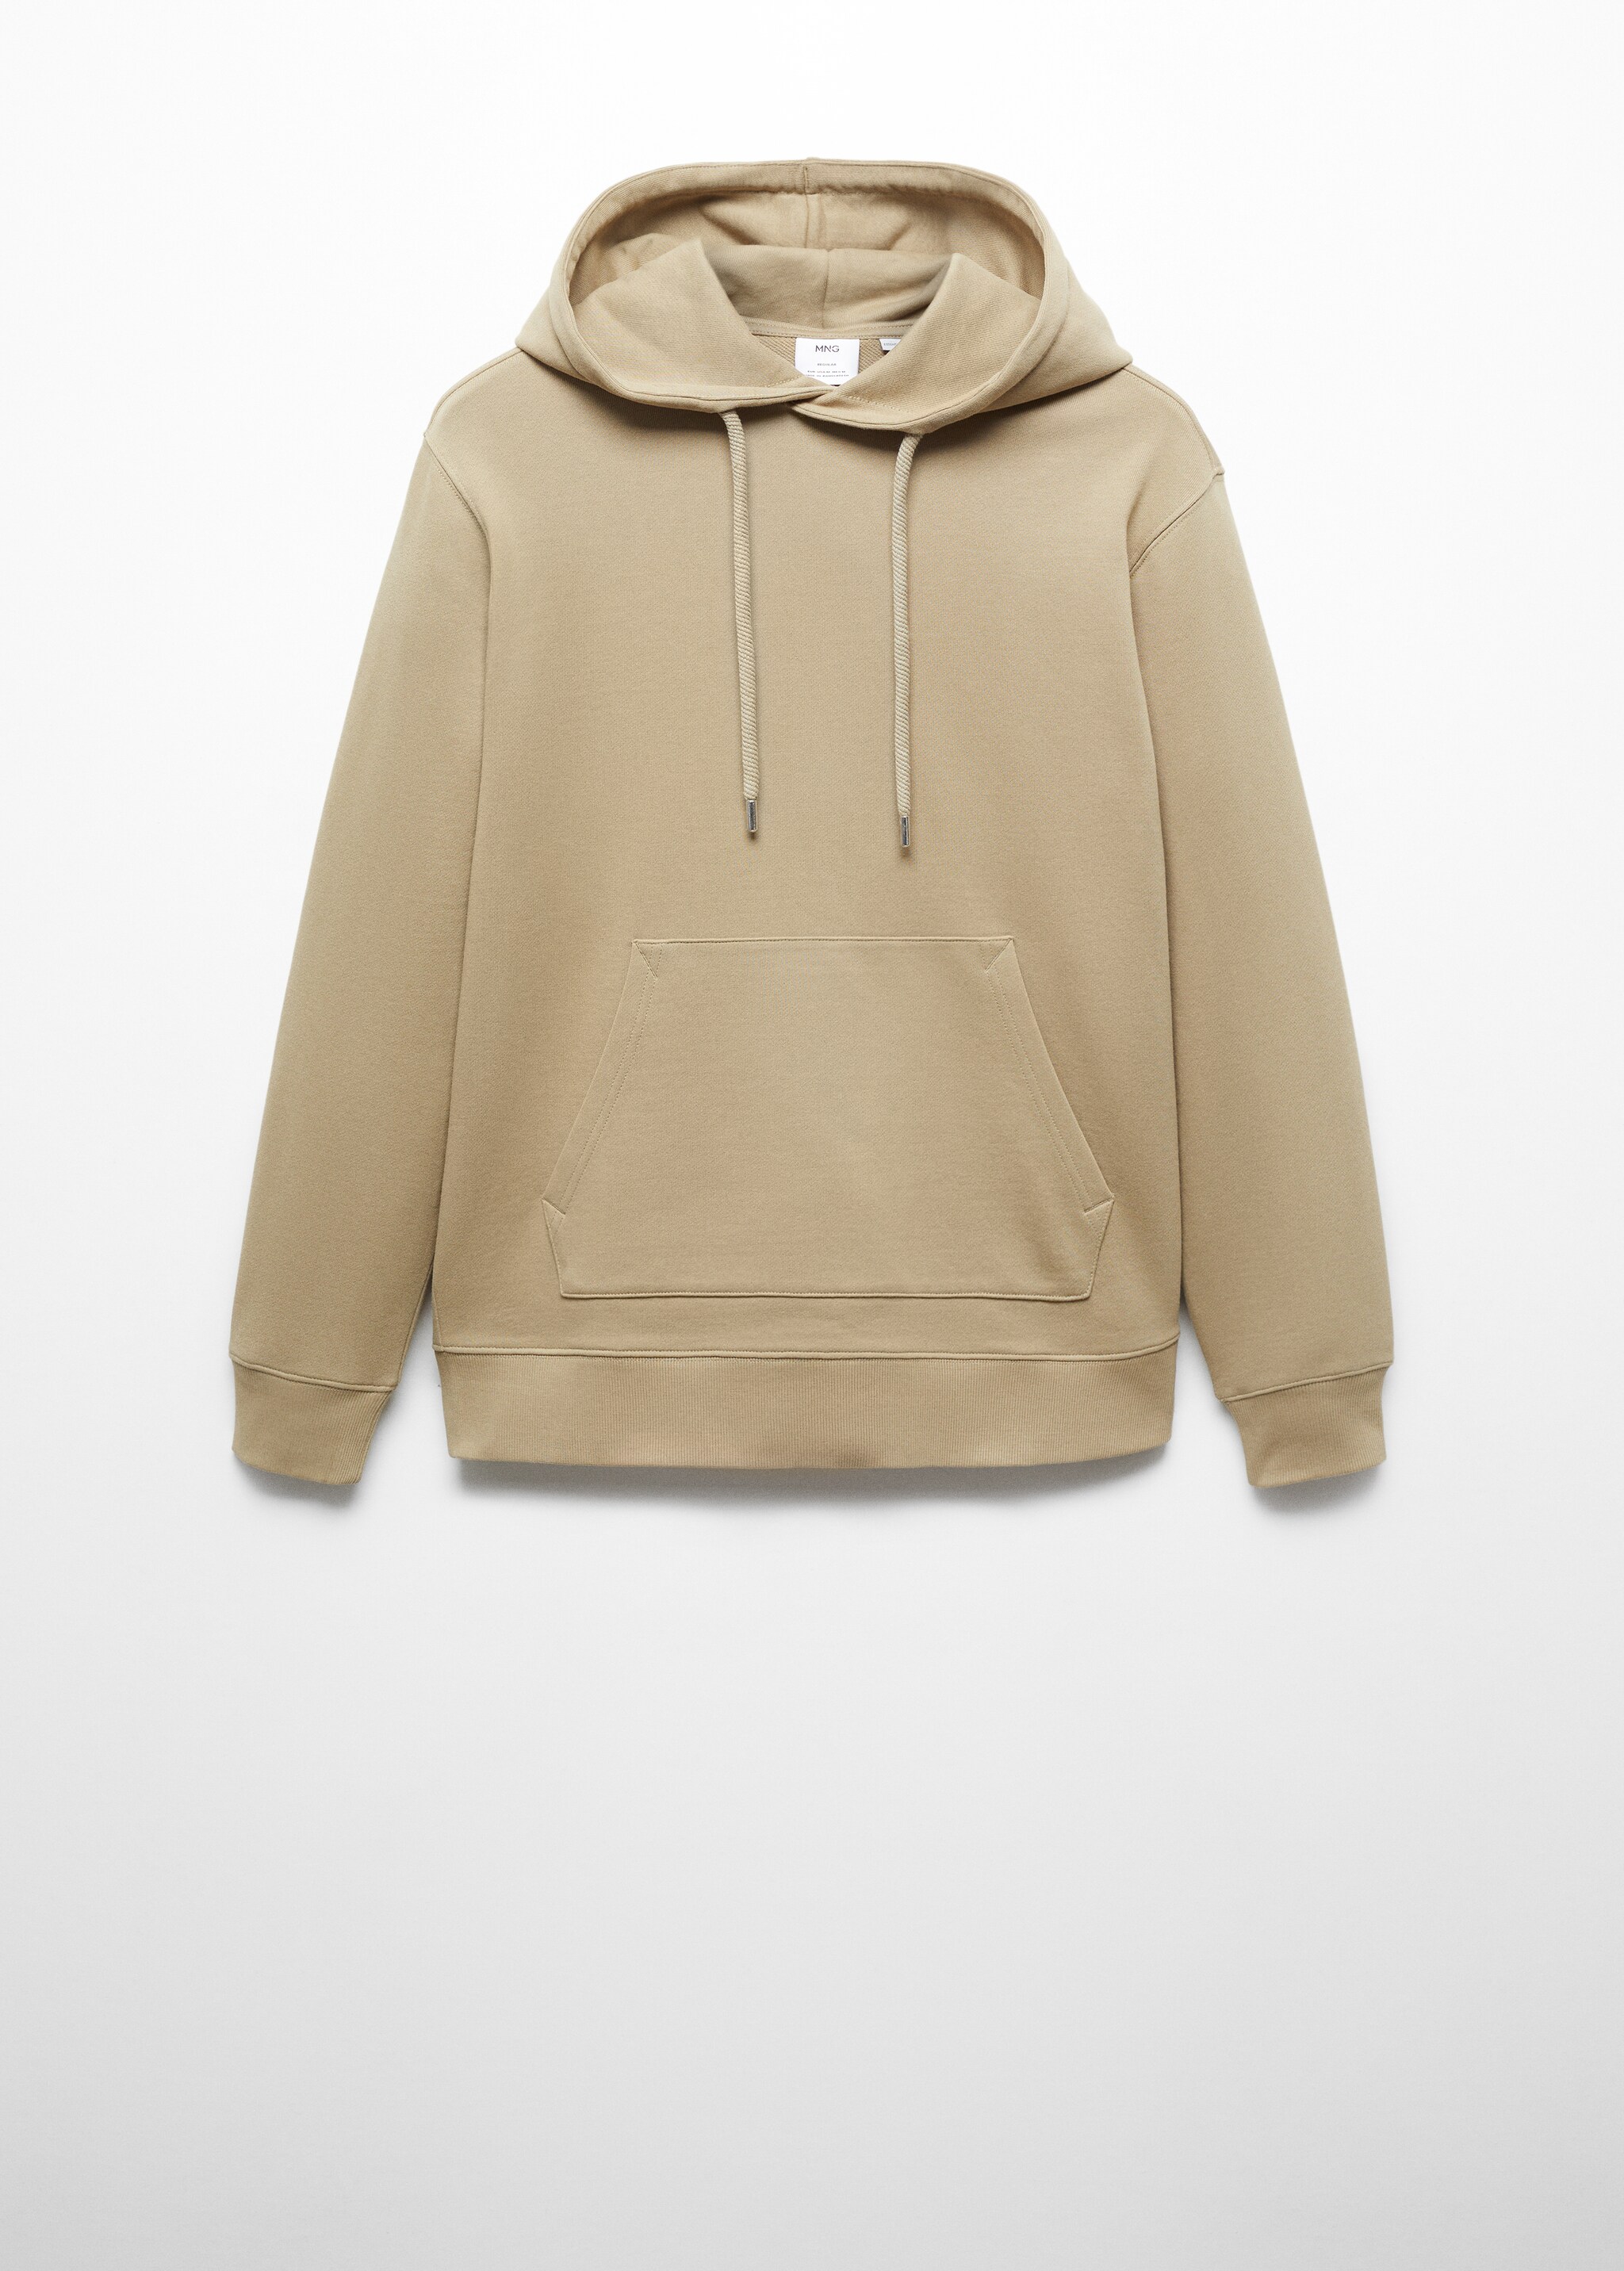 Lightweight cotton hooded sweatshirt - Article without model